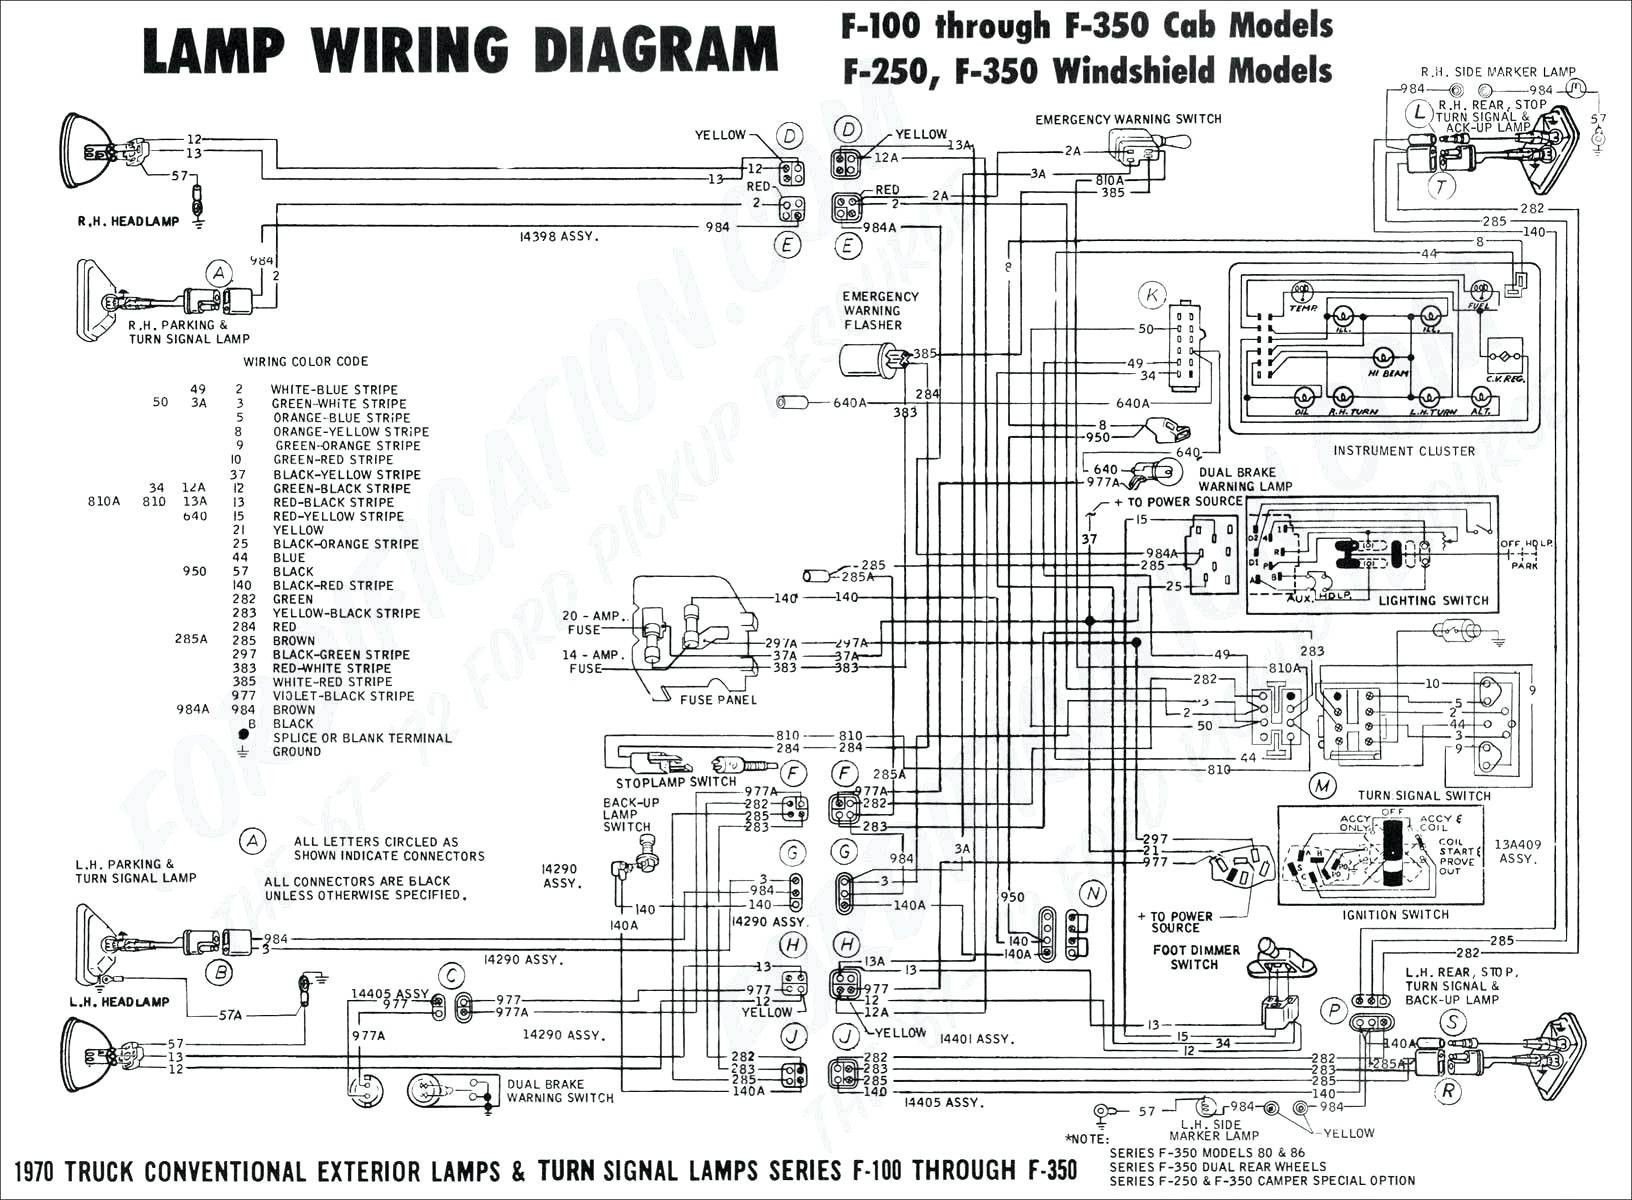 Vw Wiring Diagram Alternator Refrence 1969 Ford F100 Wiring Diagram Alternator Mustang Radio Astounding In